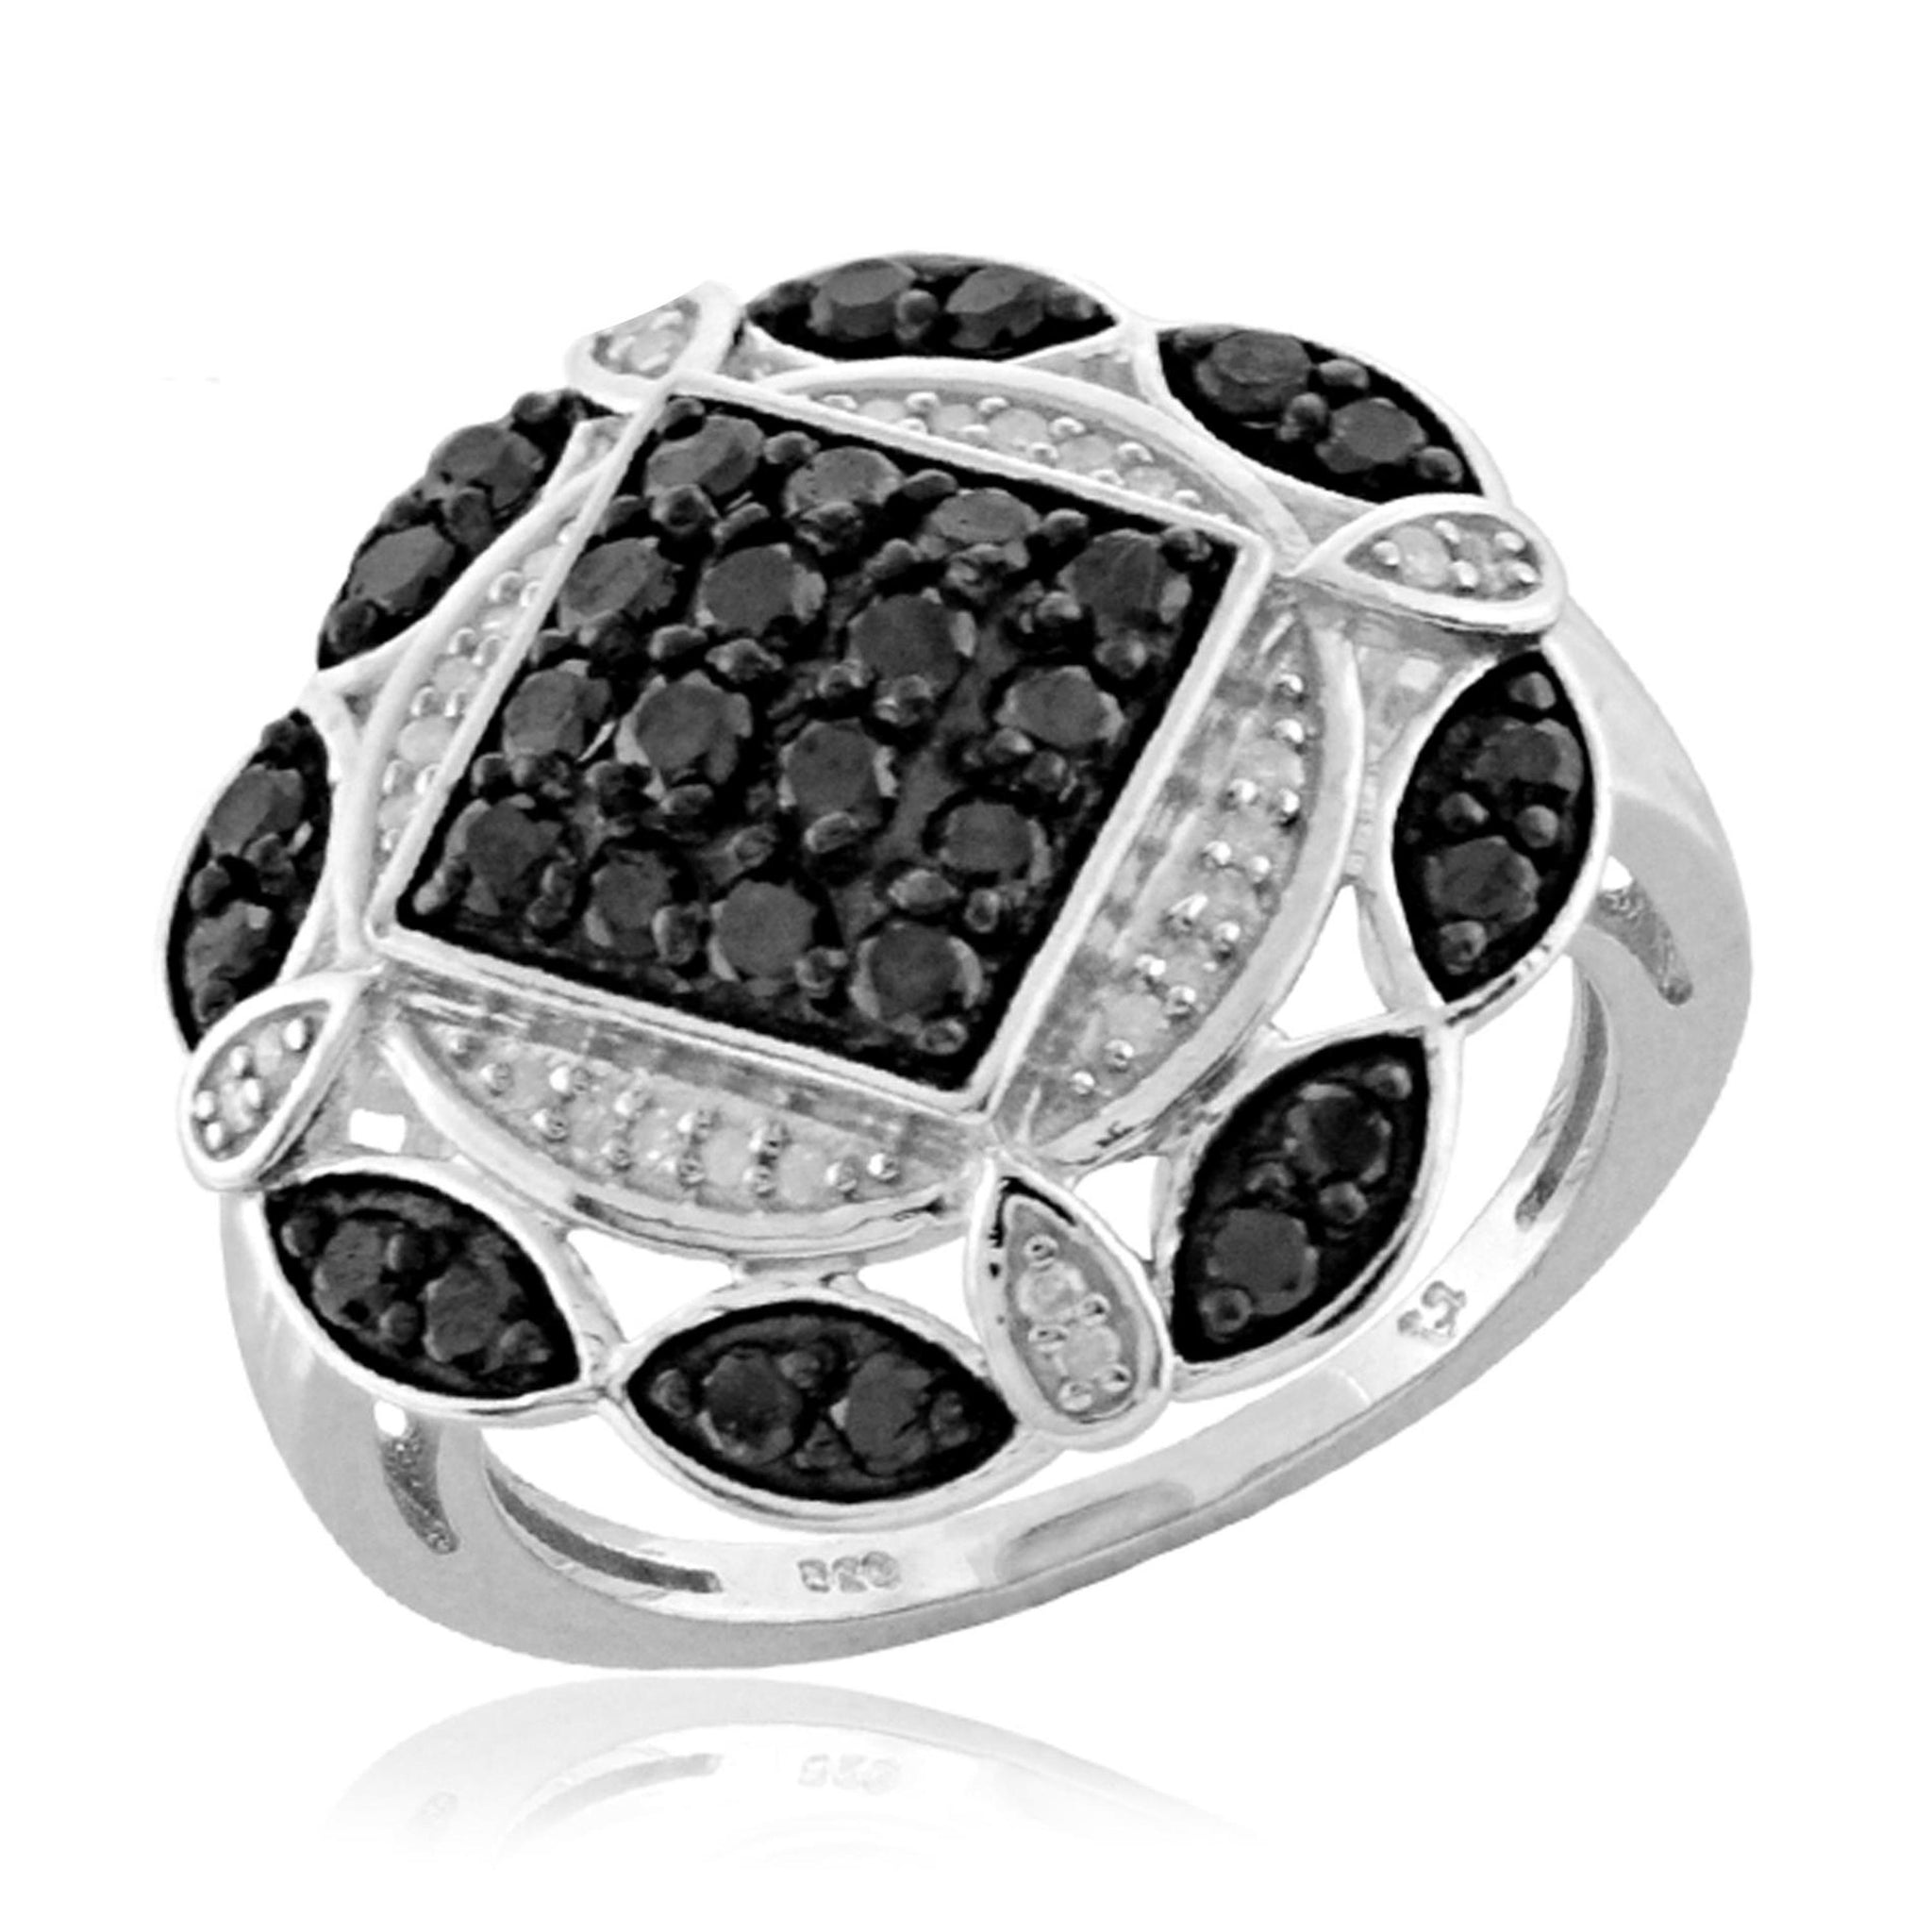 JewelonFire 1 Carat T.W. Black And White Diamond Sterling Silver Cocktail Ring